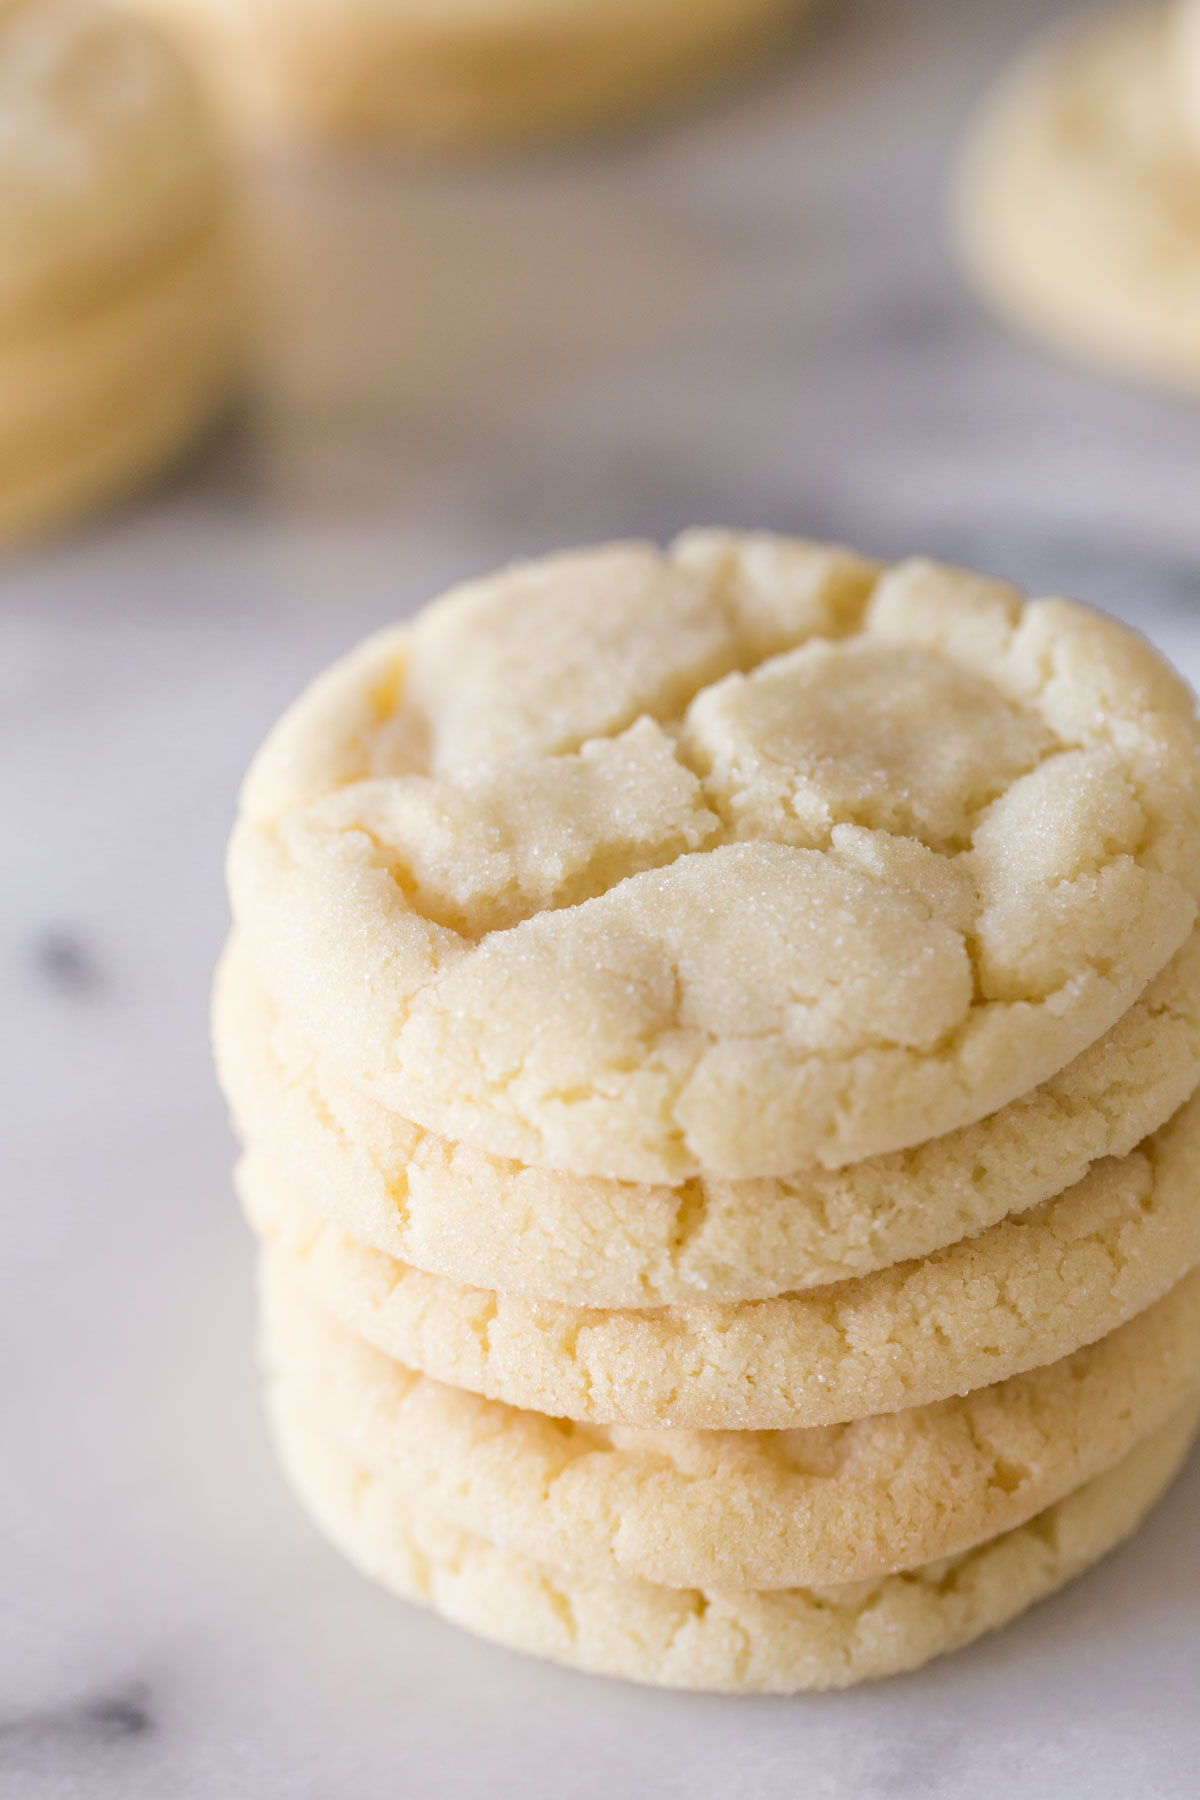 https://d2t88cihvgacbj.cloudfront.net/manage/wp-content/uploads/2019/08/Soft-and-Chewy-Sugar-Cookies-2.jpg?x24658